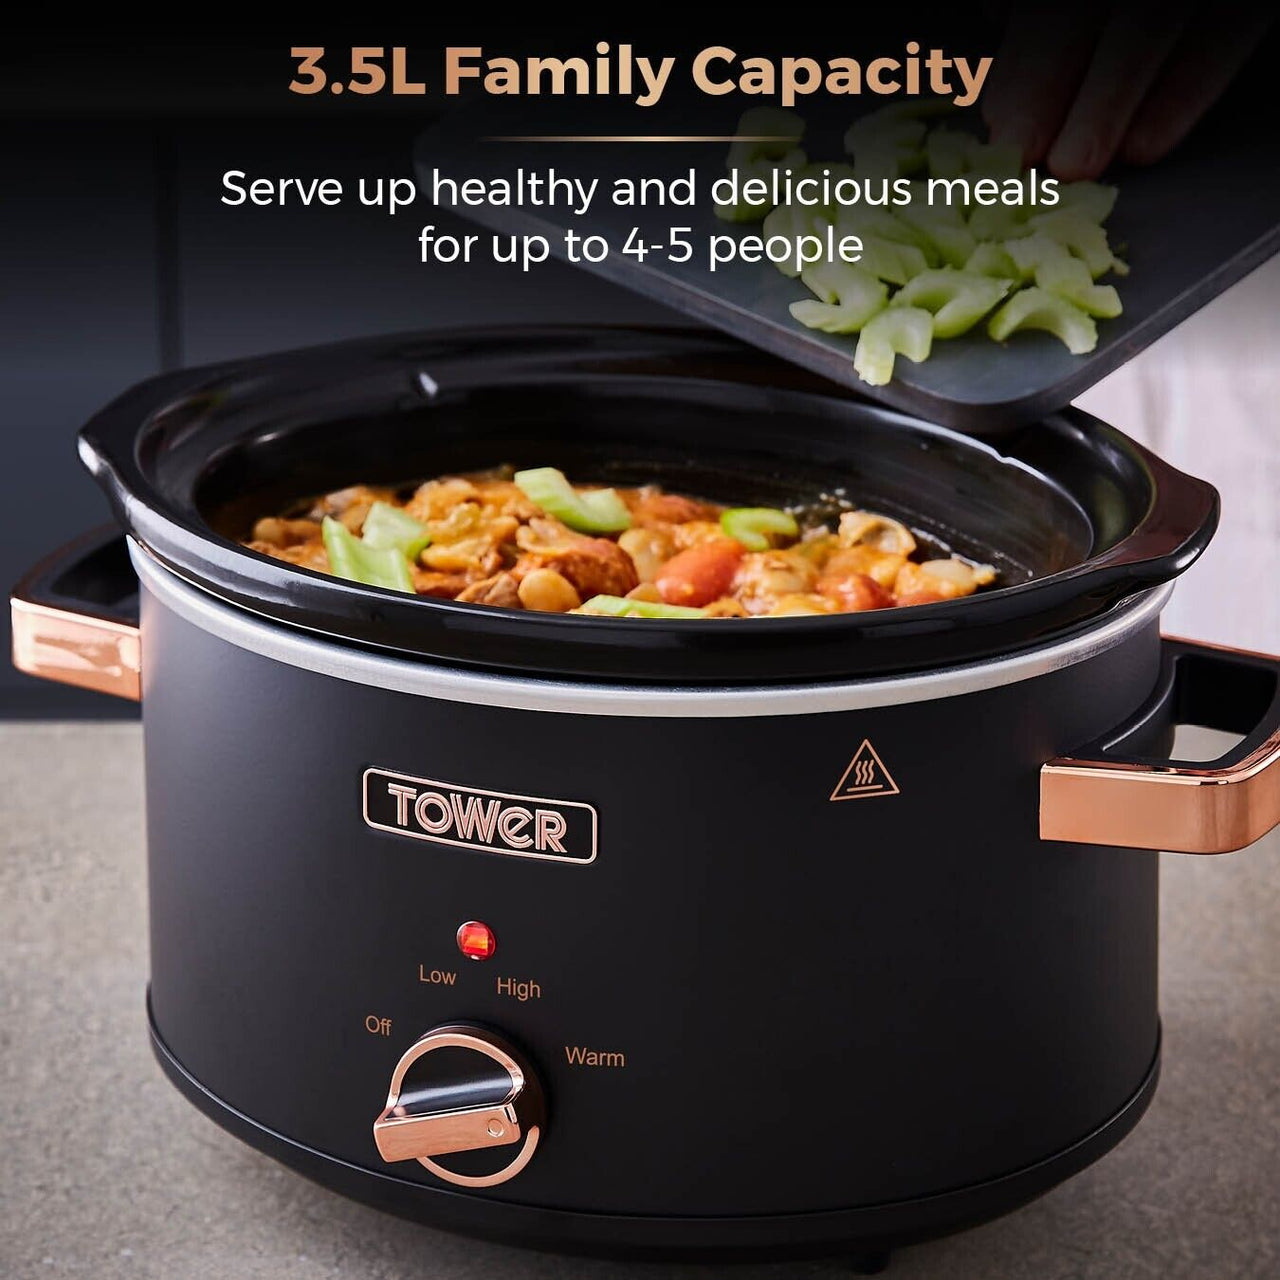 Tower Cavaletto 3.5L Slow Cooker Black & Rose Gold Ultra Energy Efficient